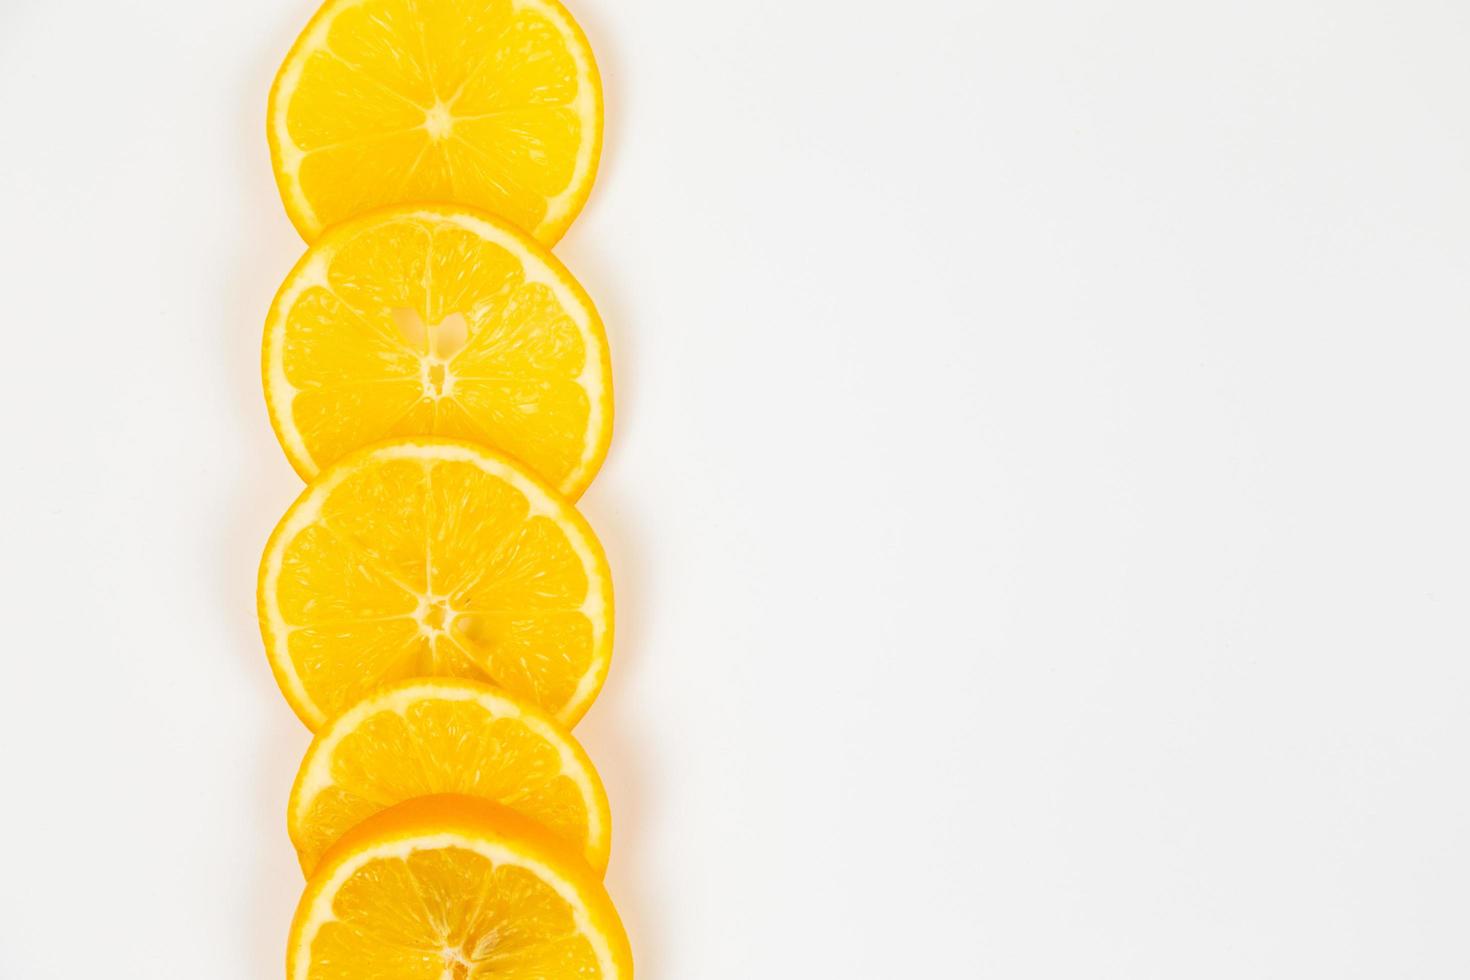 Collection of orange slices isolated on white background photo